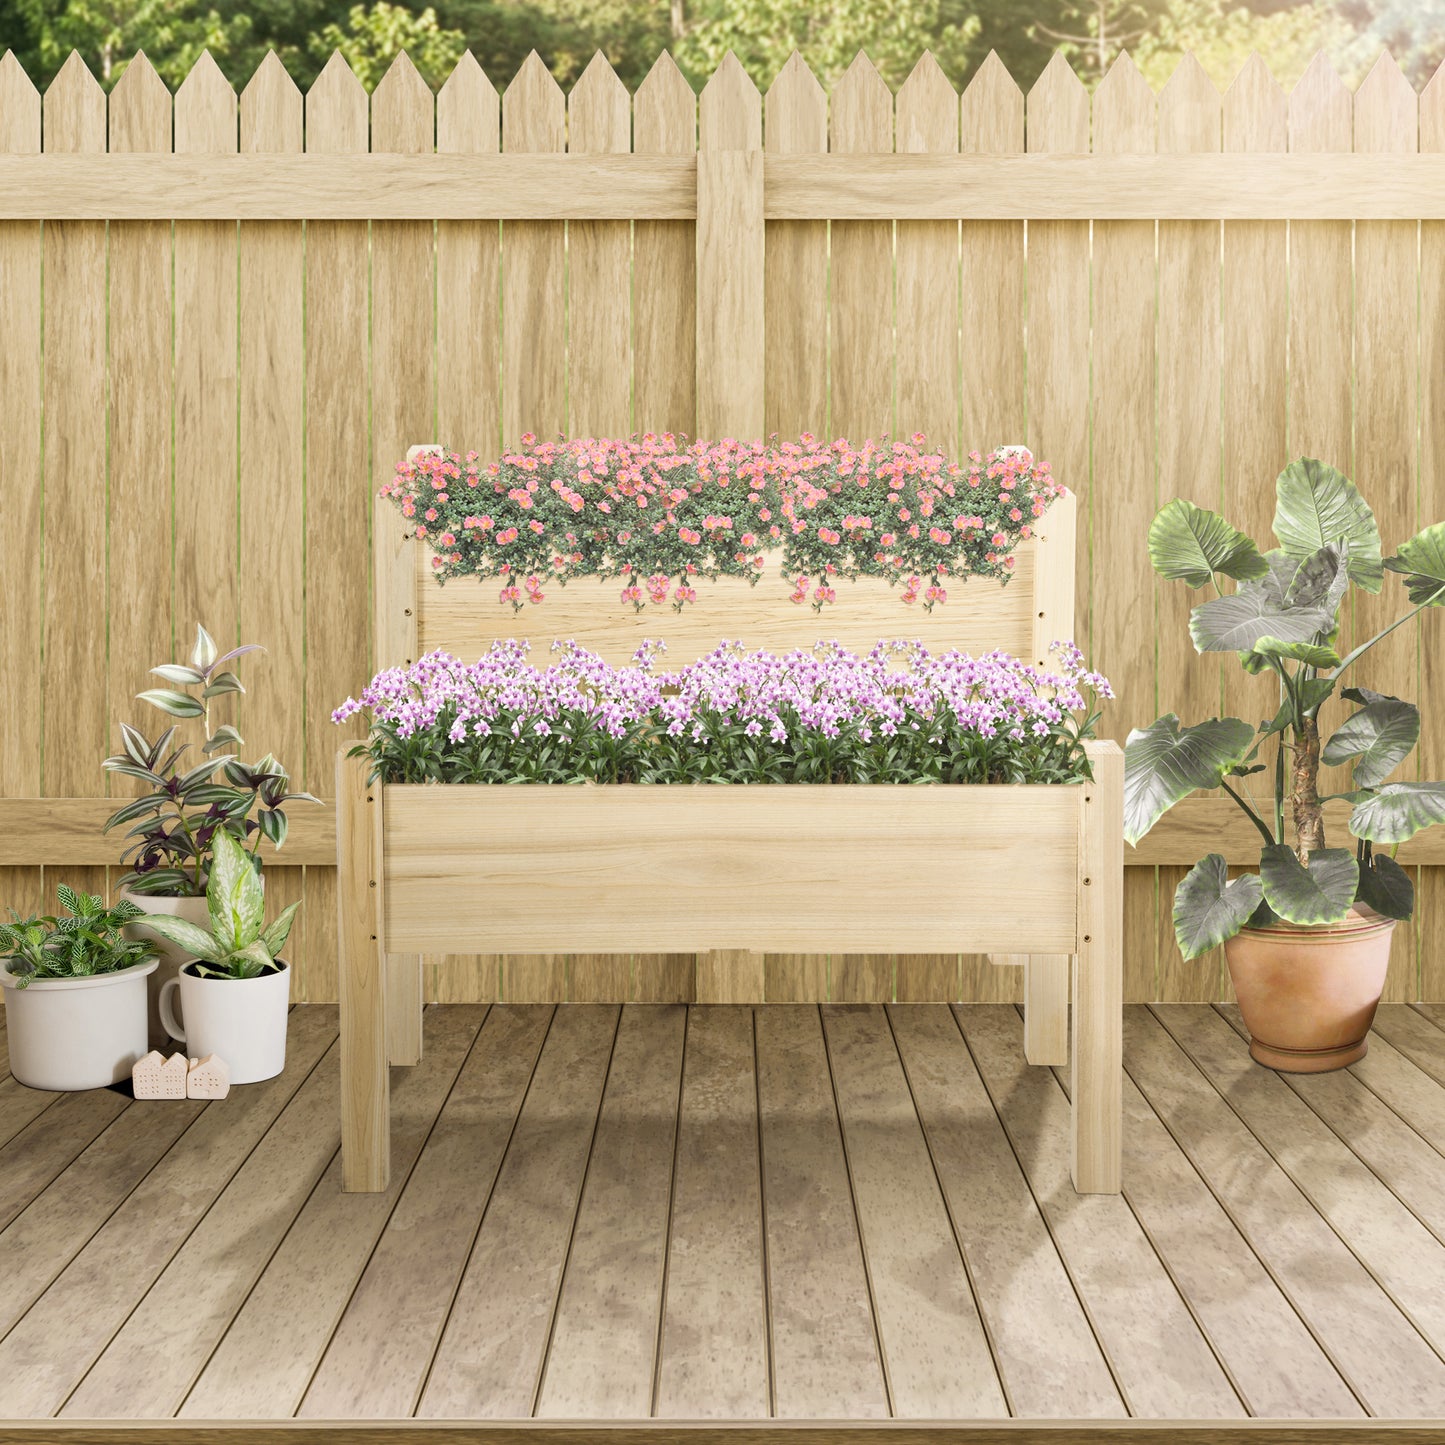 34"x34"x28" 2-Tier Raised Garden Bed Wooden Planter Box for Backyard, Patio to Grow Vegetables, Herbs, and Flowers at Gallery Canada